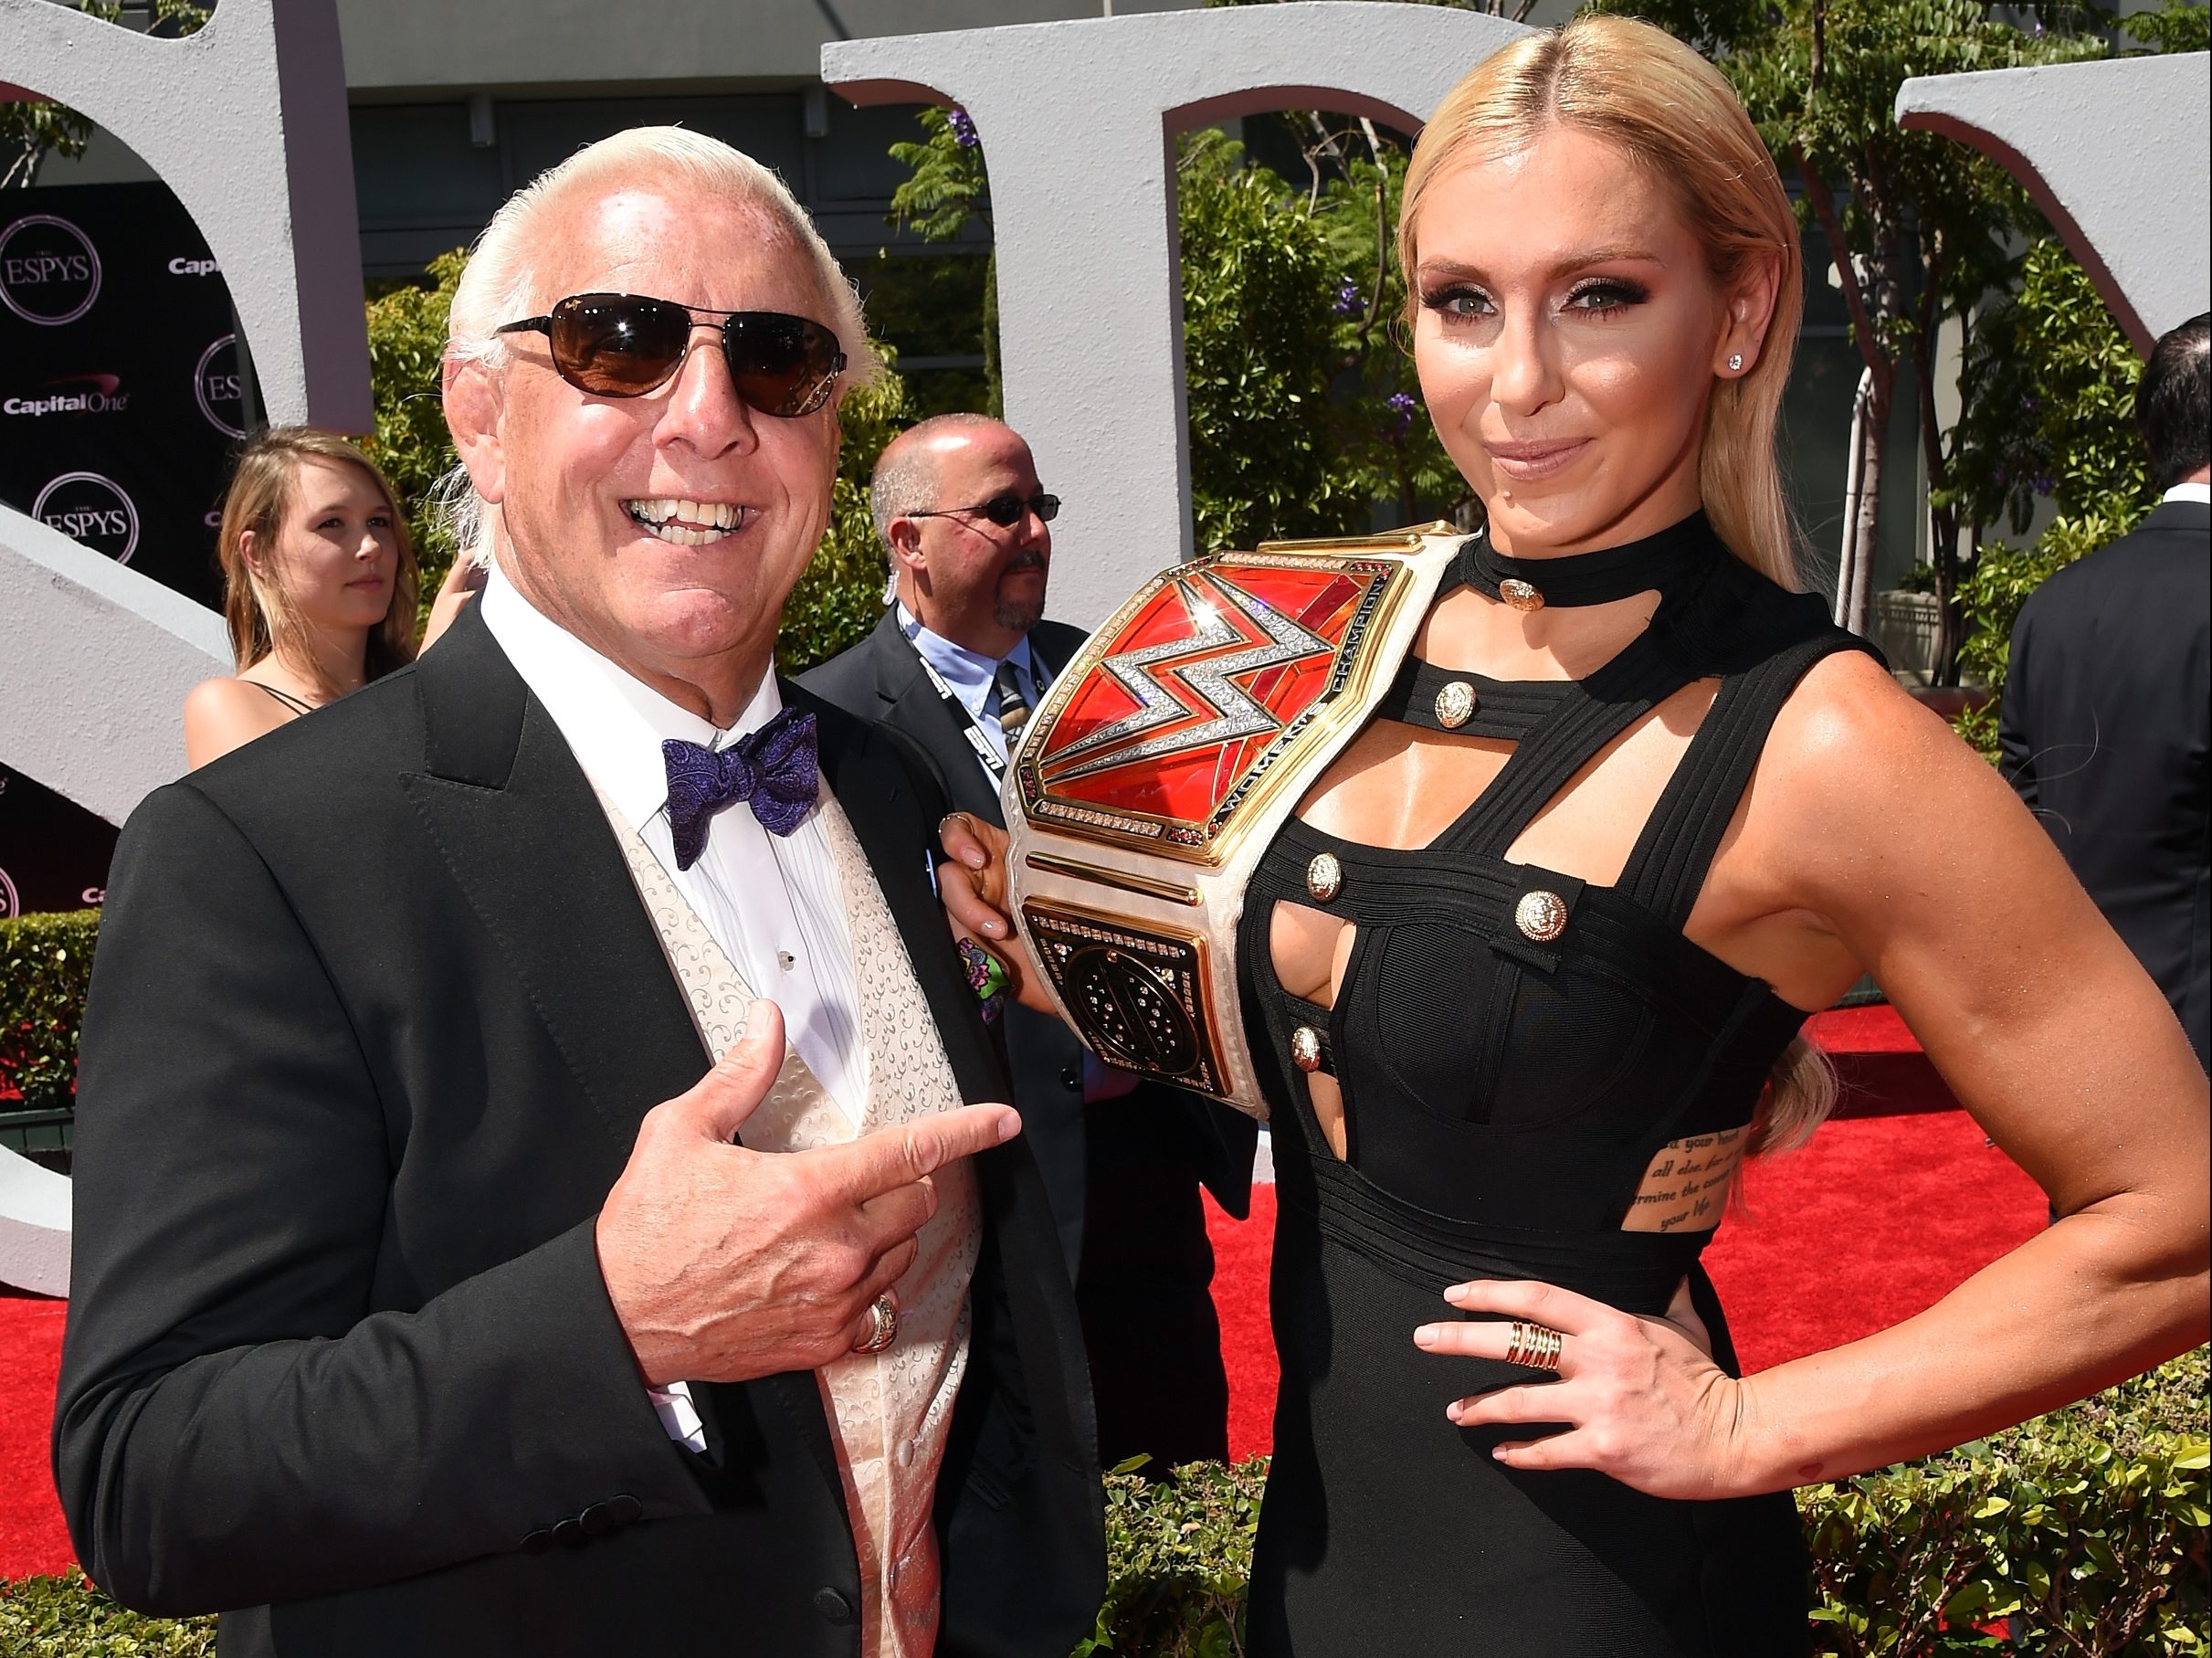 Stephanie Mcmahon Wwe Xxx - Ric Flair: They're trying to 'murder' disgraced WWE boss Vince McMahon |  Toronto Sun